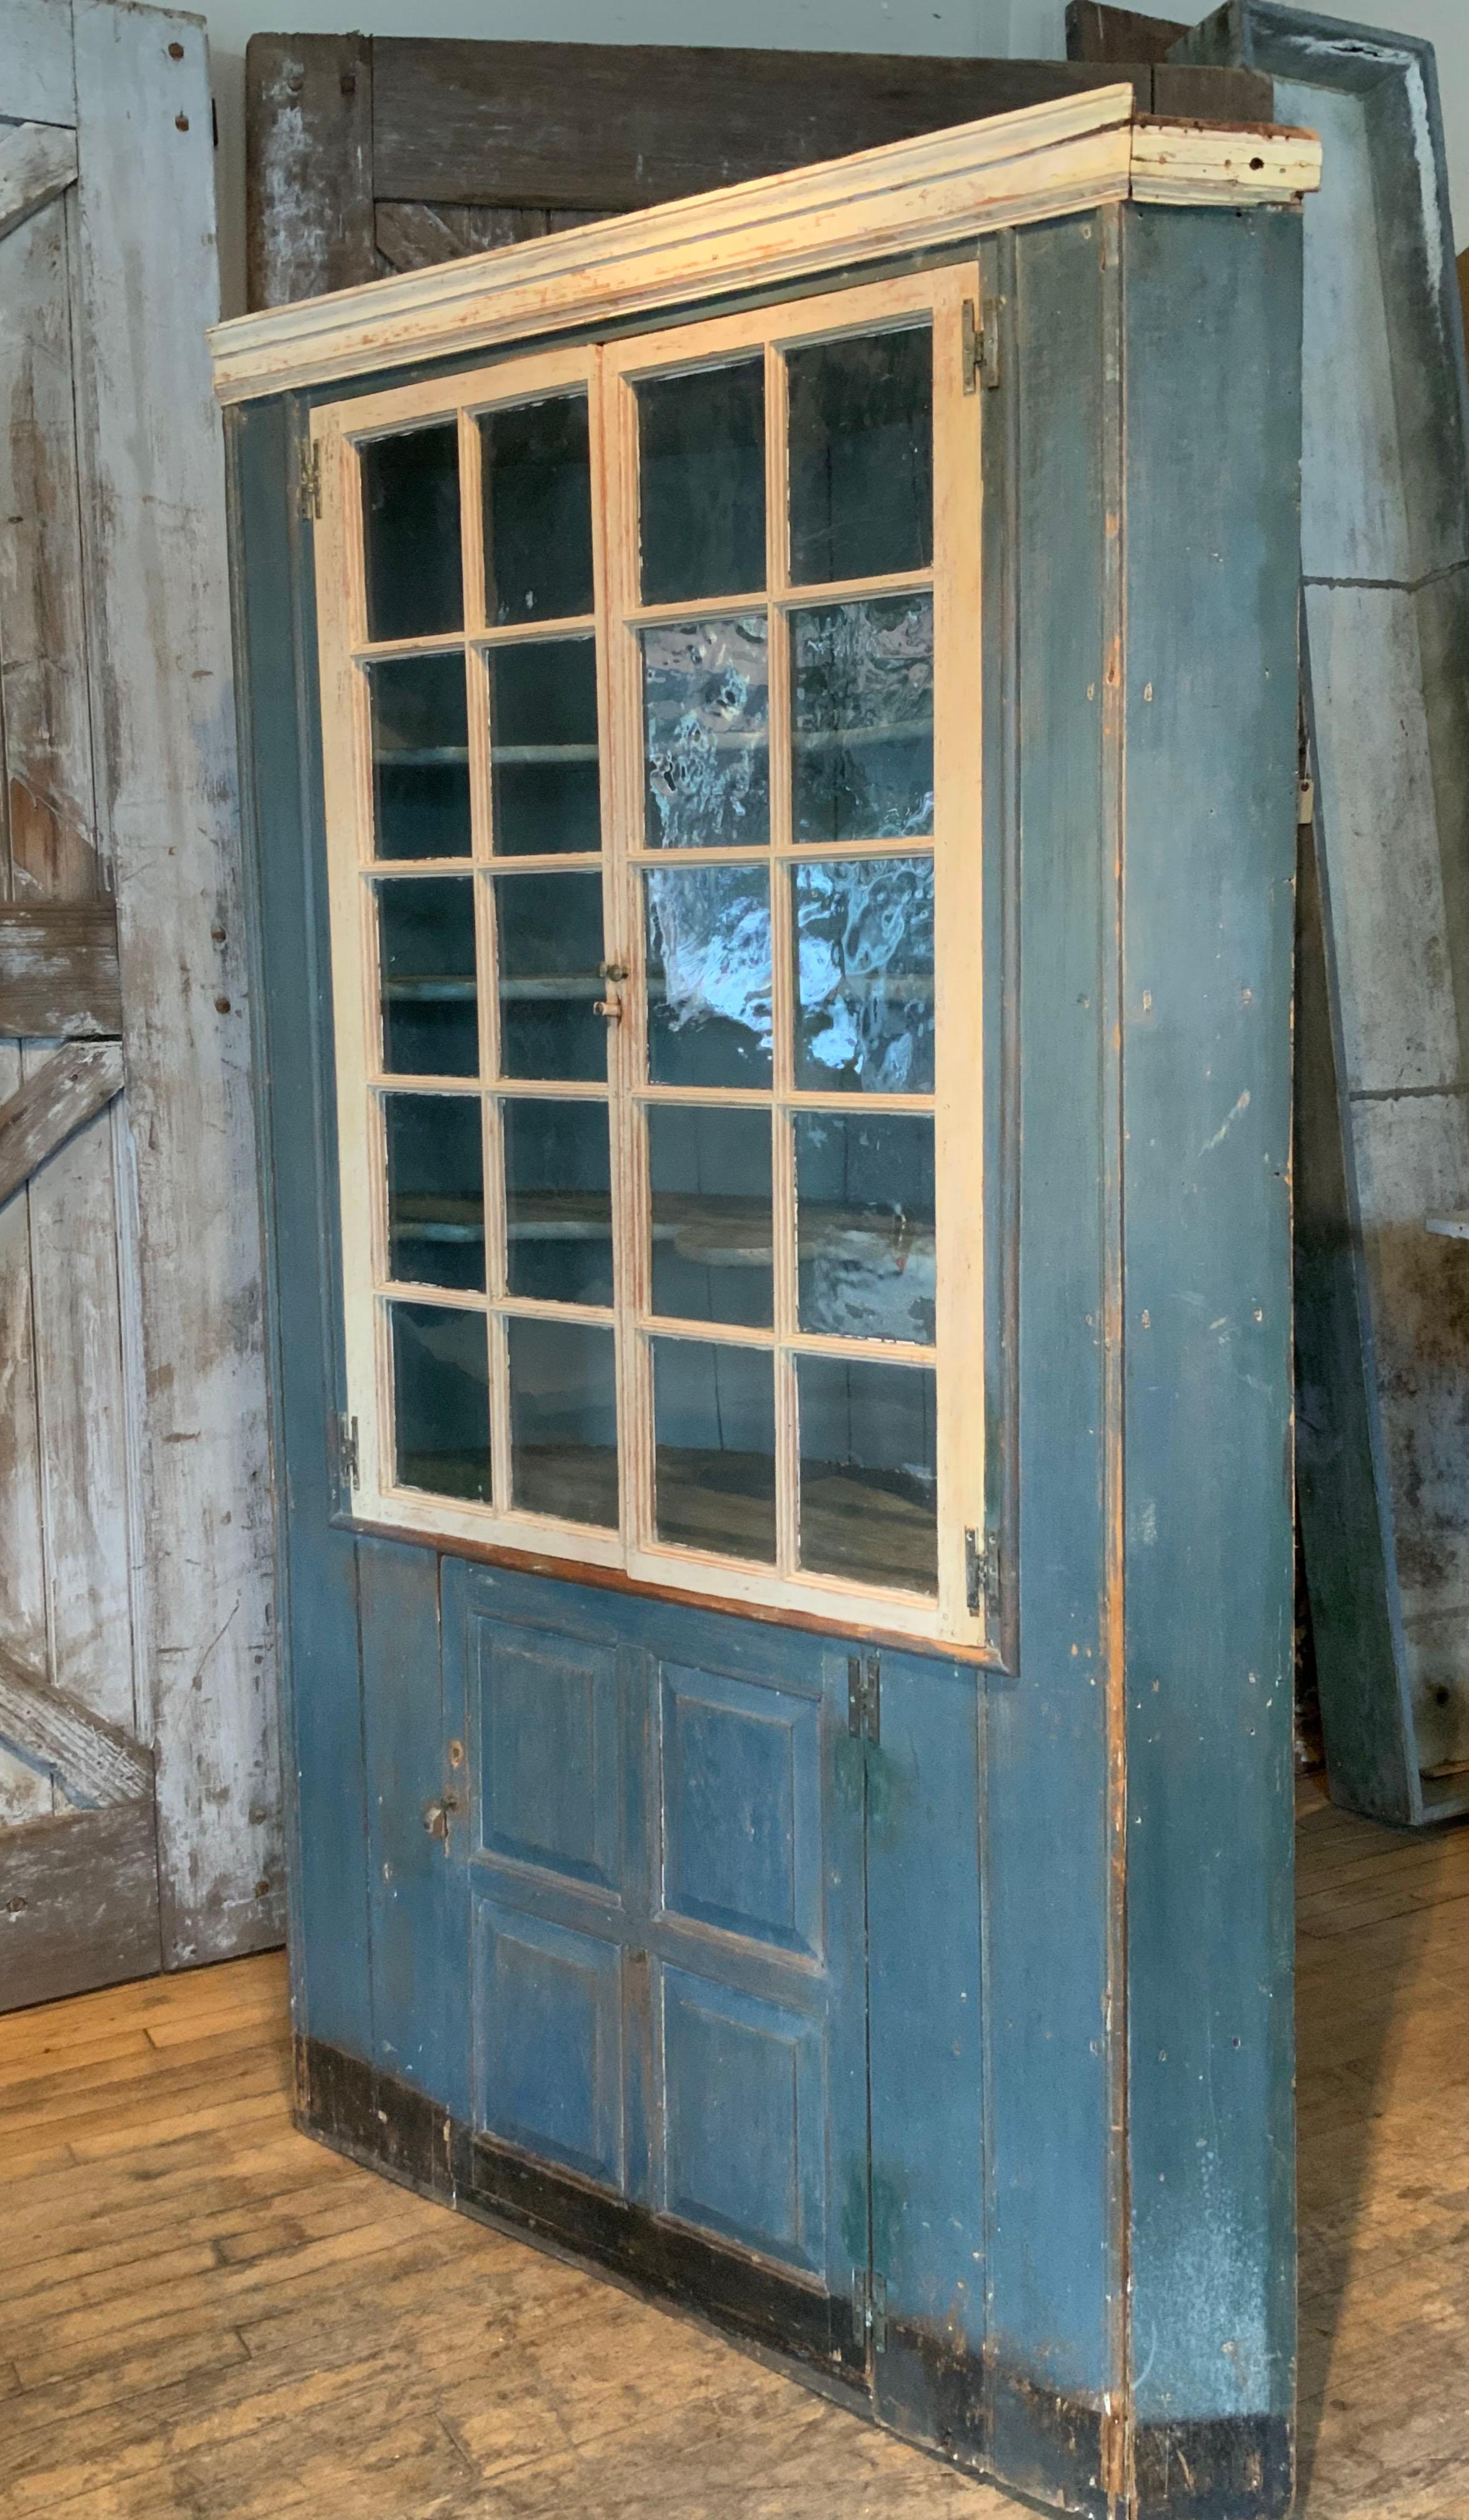 A beautiful antique 19th century country cupboard, with a barrel back. Perfect for a corner, but also can work along a straight wall. beautiful original blue paint and fantastic divided pane doors with original glass. the interior has curved shelves